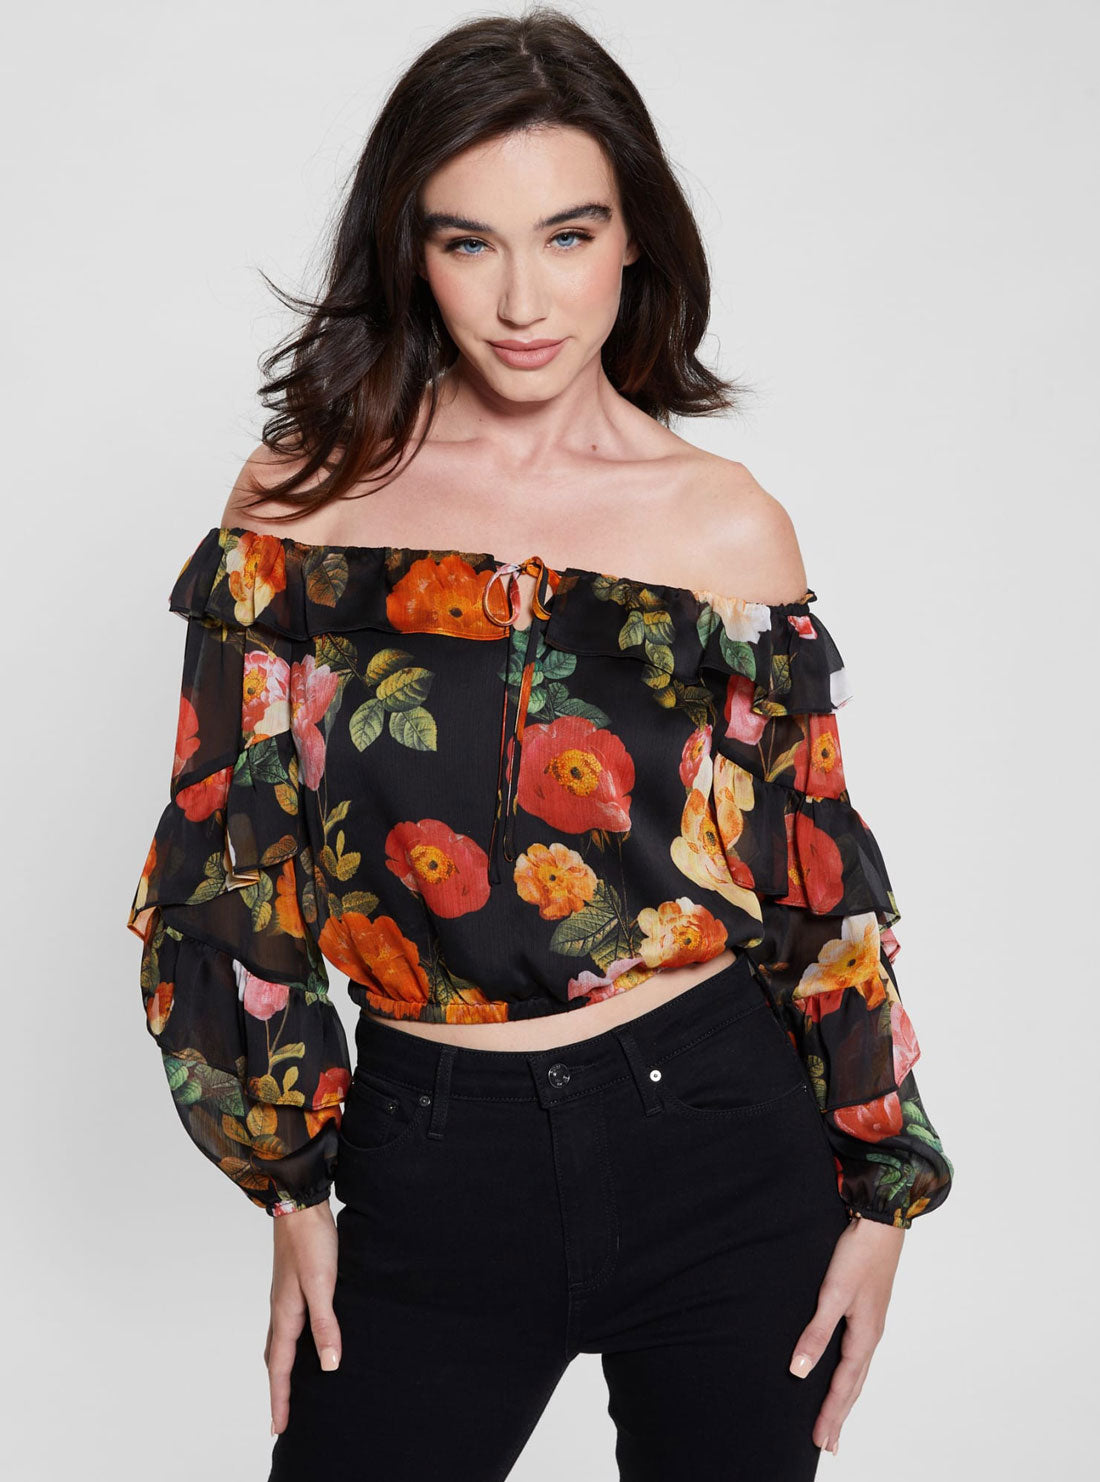 GUESS Black Floral Shani Ruffle Top front view